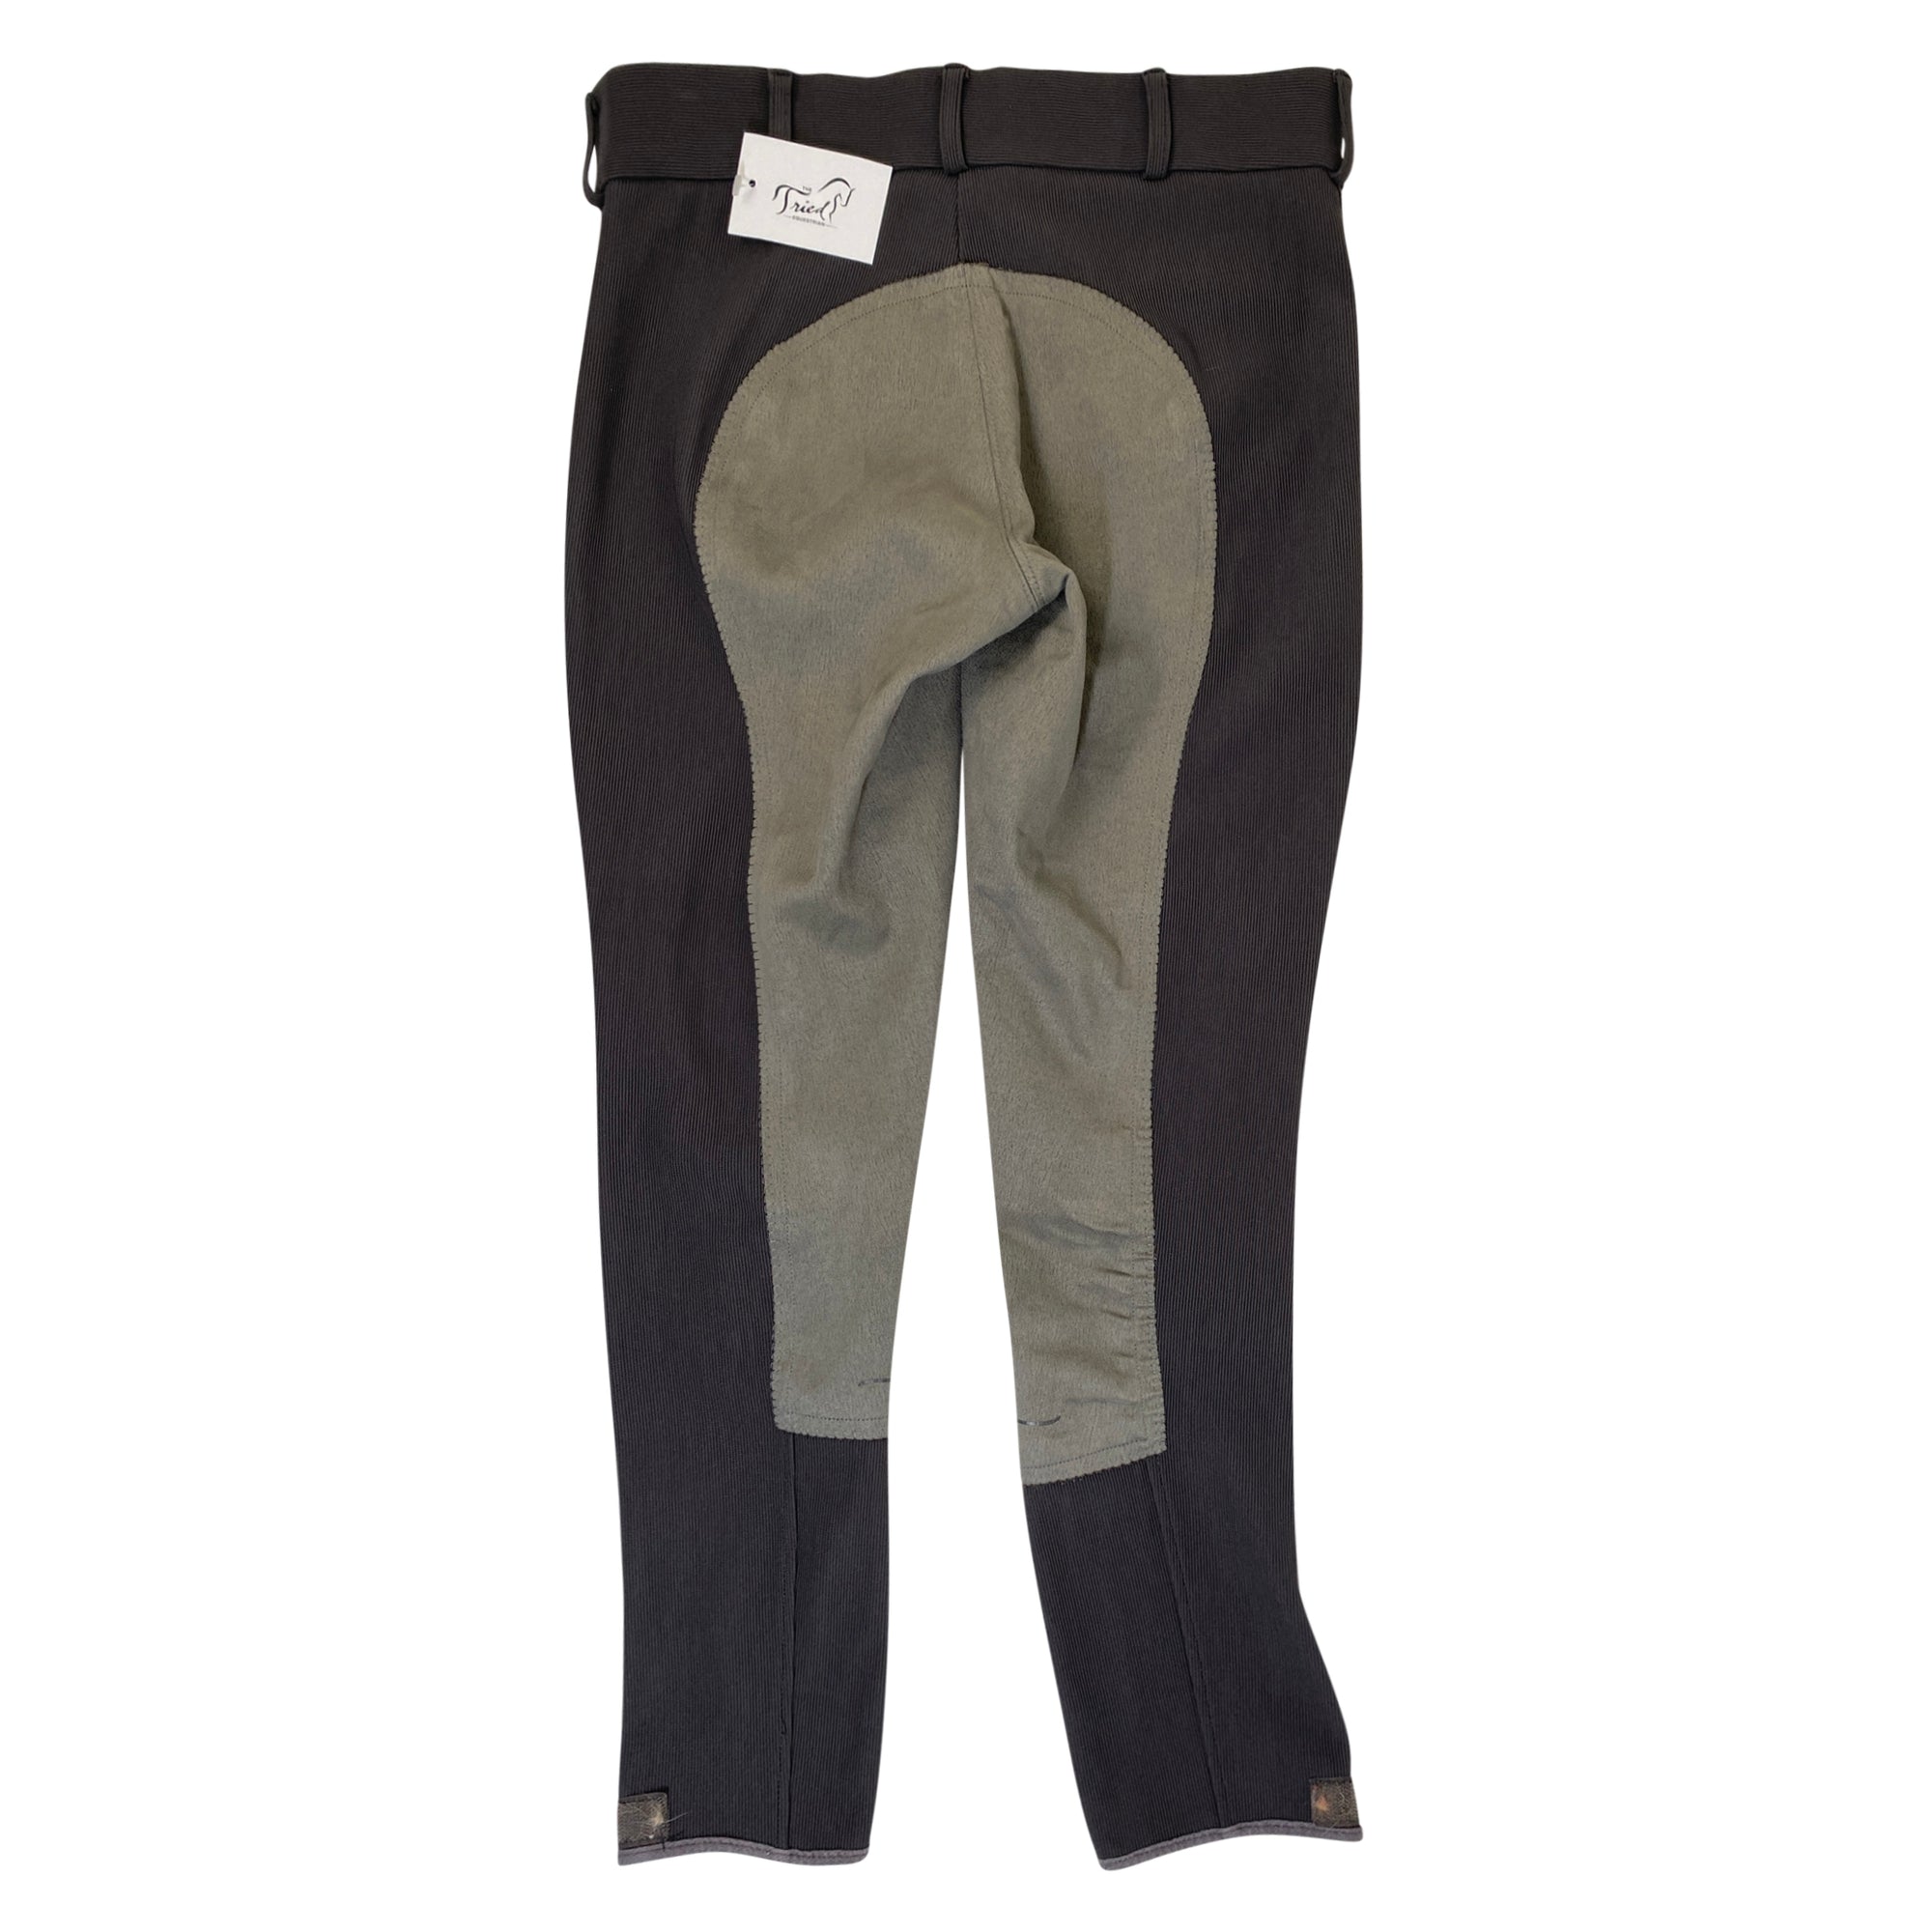 TuffRider Pull-on Low Rise Ribb Breeches in Charcoal